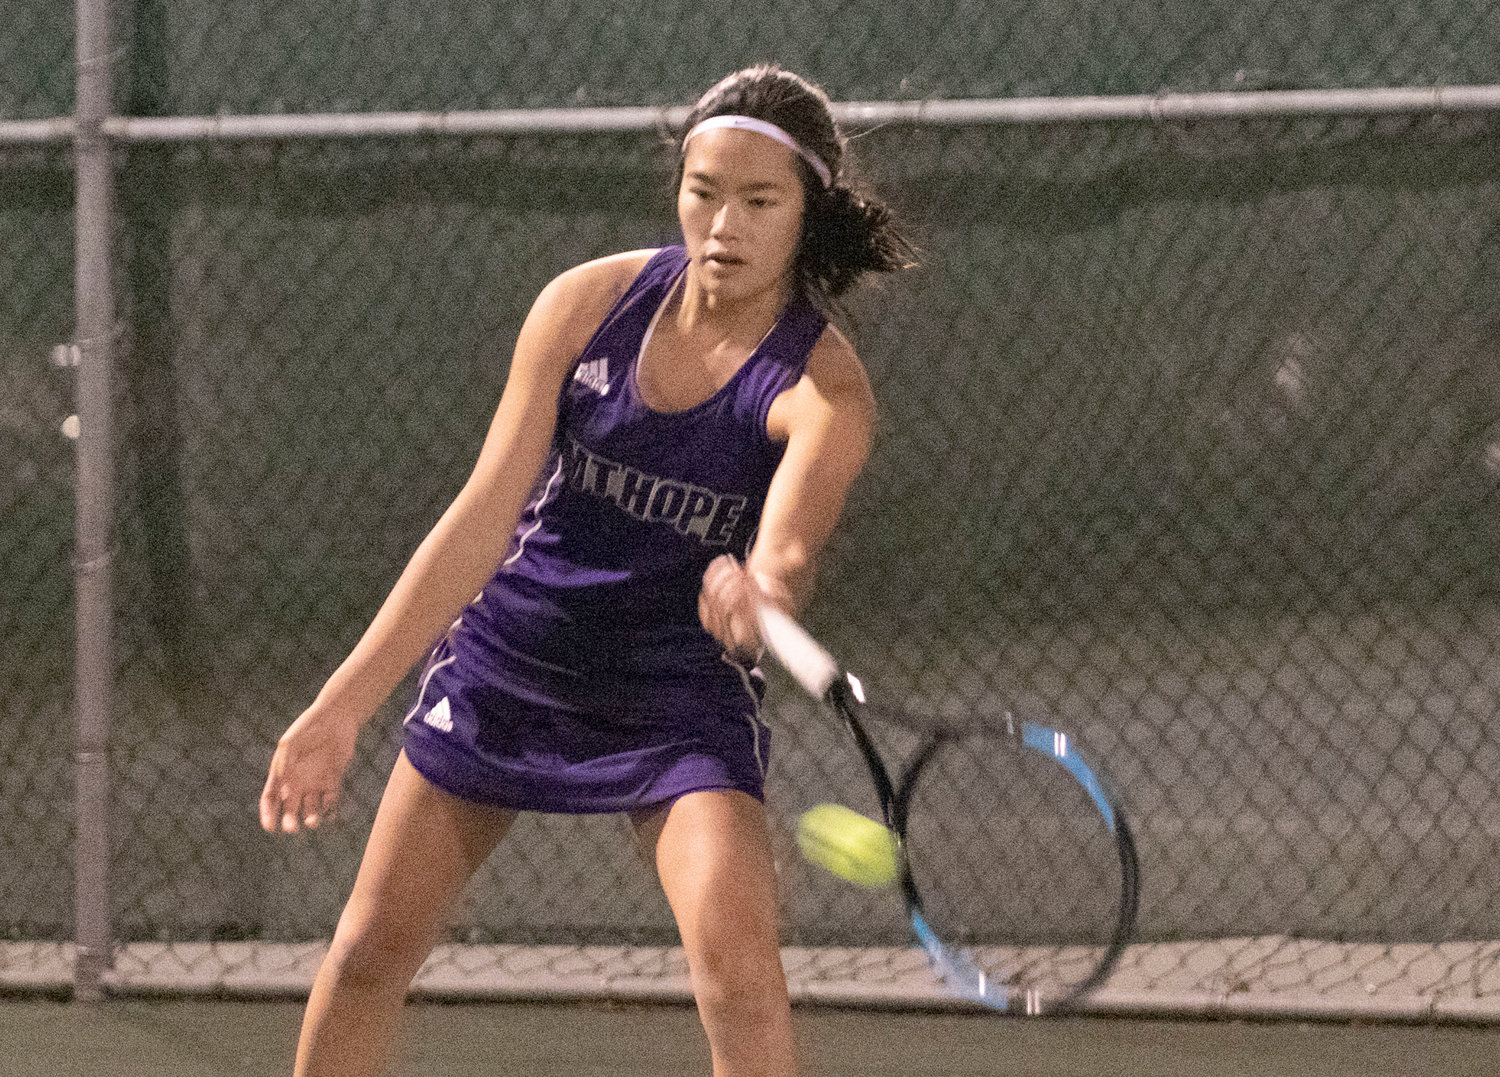 Elsa White the Huskies first singles player beat Meghan Mancini in straight sets, 6-3, 6-1. The left-handed sophomore overpowered Mancini with her serve and groundstrokes.